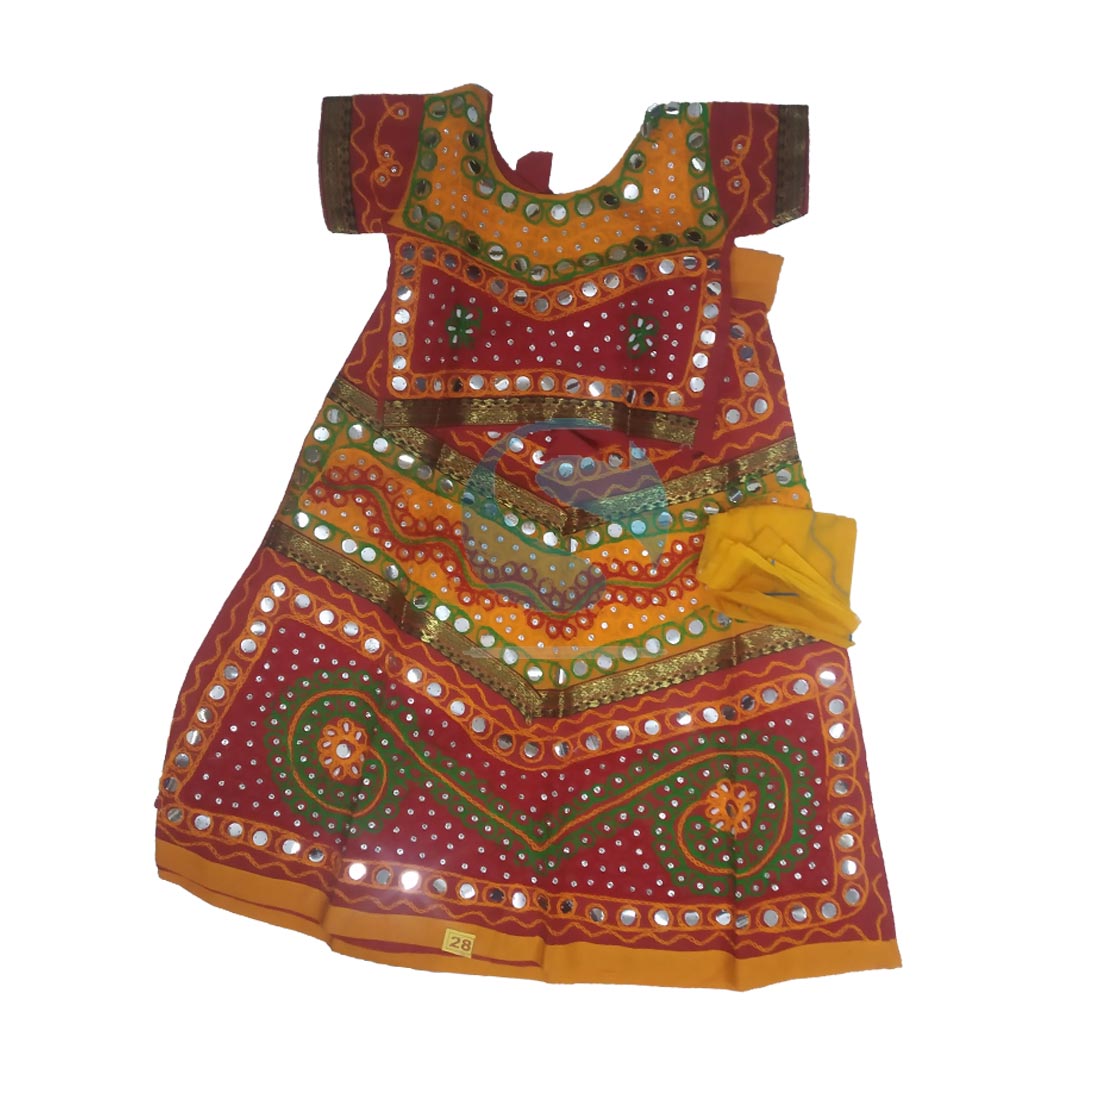 Buy TAN ANSH Pure Cotton Gujrati Dress For Garba In Lahnga Pattern (INDIAN  TRADITIONAL) at Amazon.in